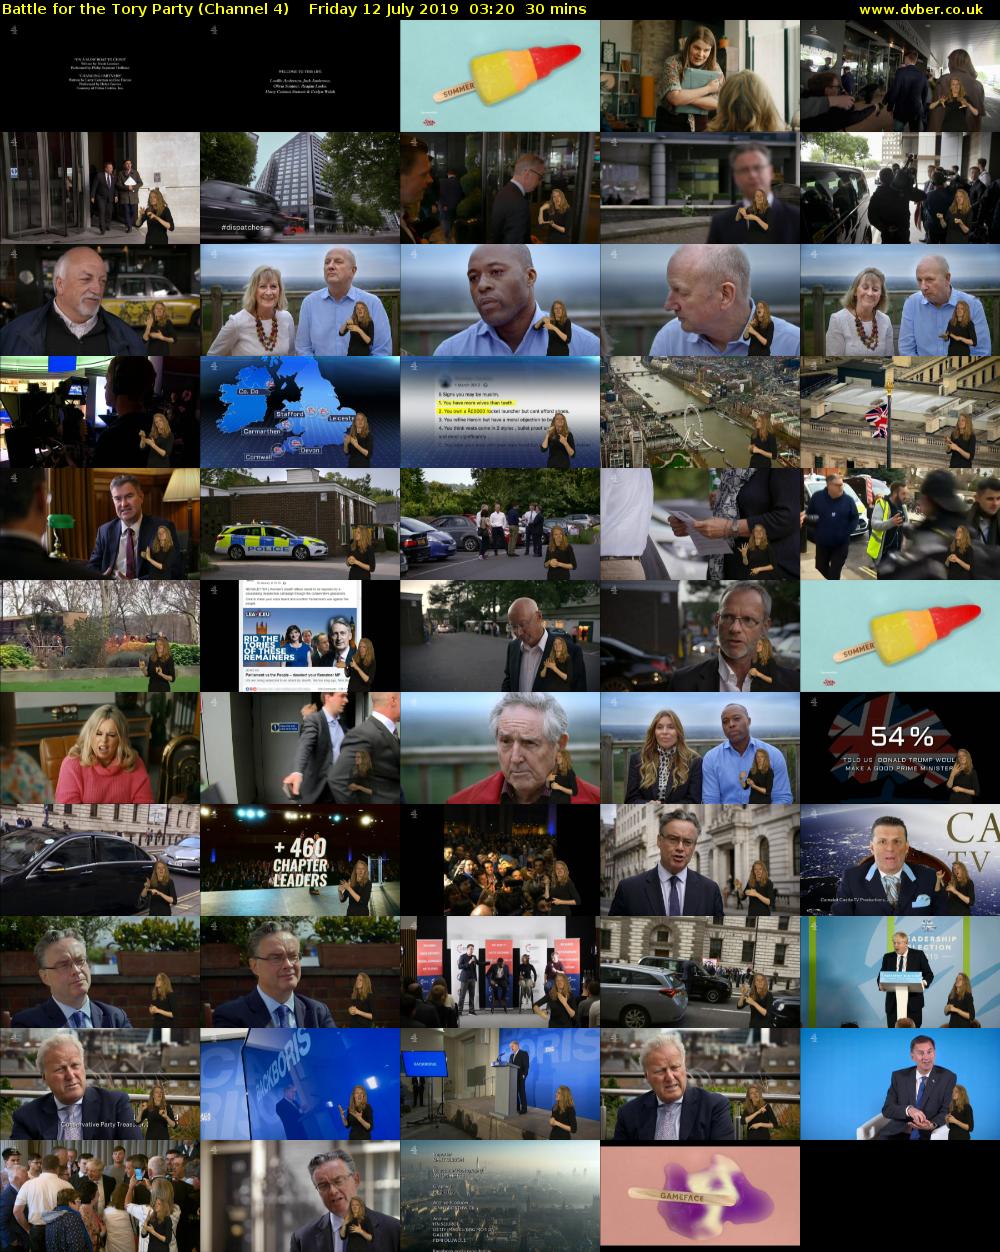 Battle for the Tory Party (Channel 4) Friday 12 July 2019 03:20 - 03:50